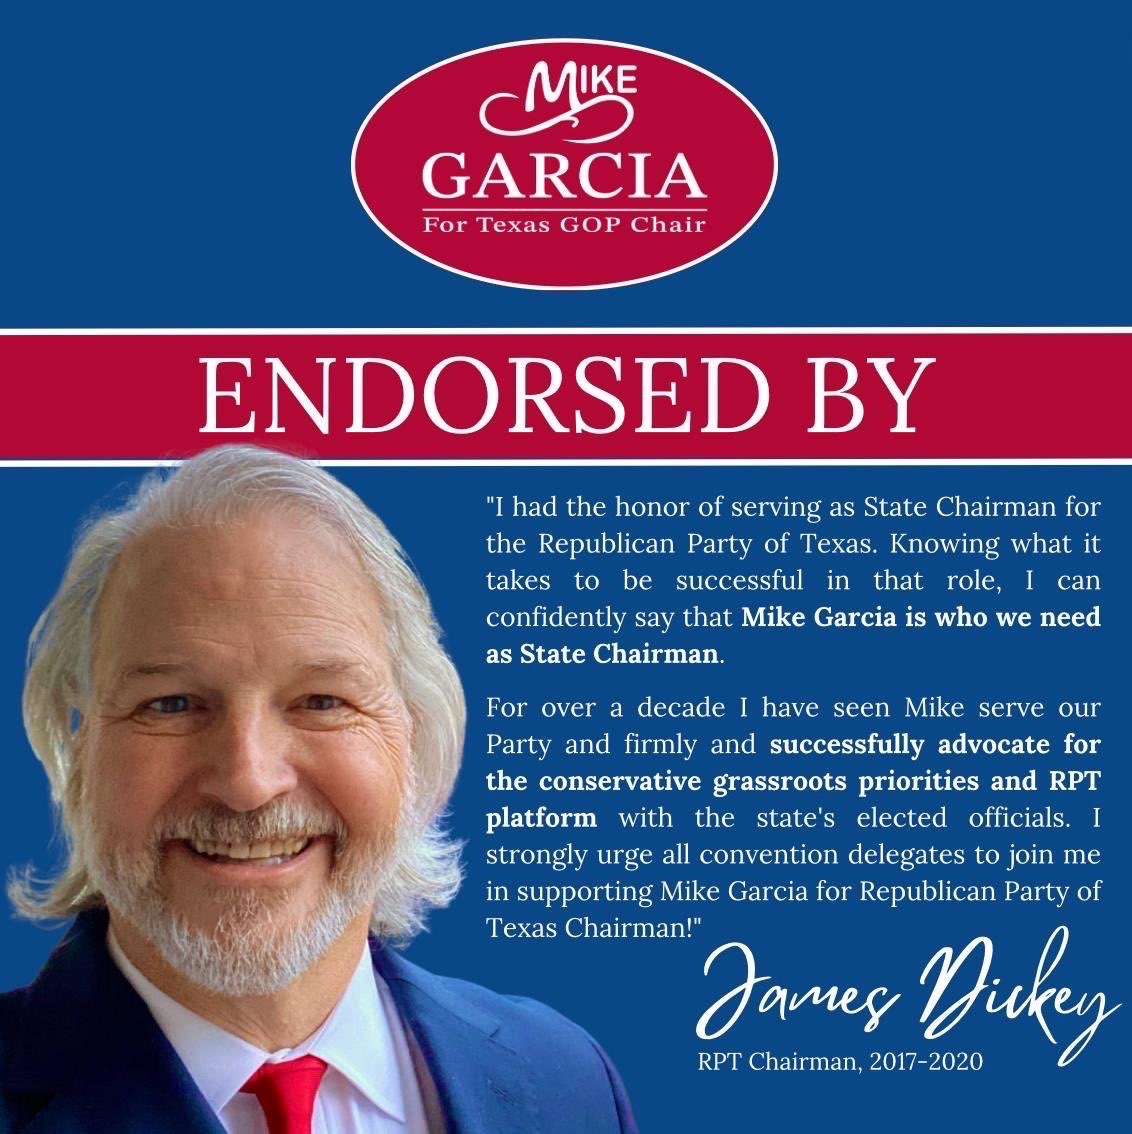 We are incredibly grateful to receive the endorsement of 2017-2020 @TexasGOP State Chairman @jamesdickey! James and I have worked together on passing grassroots priorities and the RPT platform into law, and I’m grateful for his mentorship and advice moving forward. He’s is an…